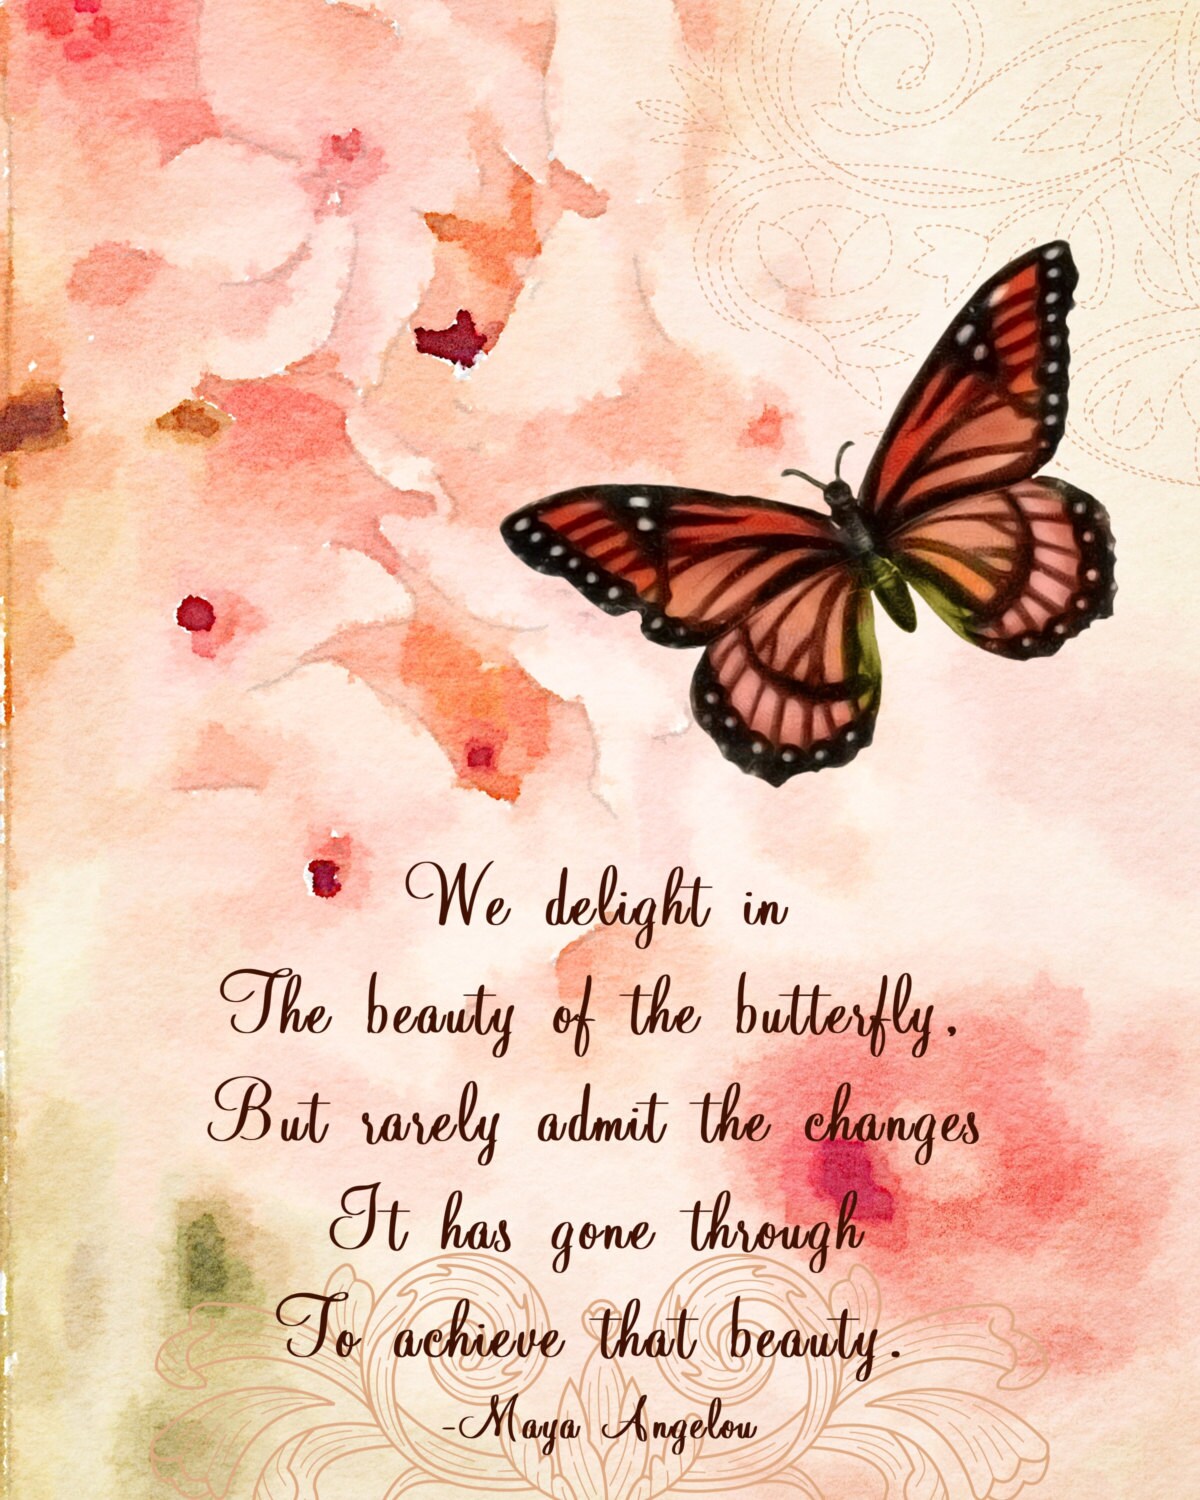 Maya Angelou A Butterfly Quote Shabby Chic Watercolor Motivational Altered Fine Art Reproduction Print Chez Lorraine S